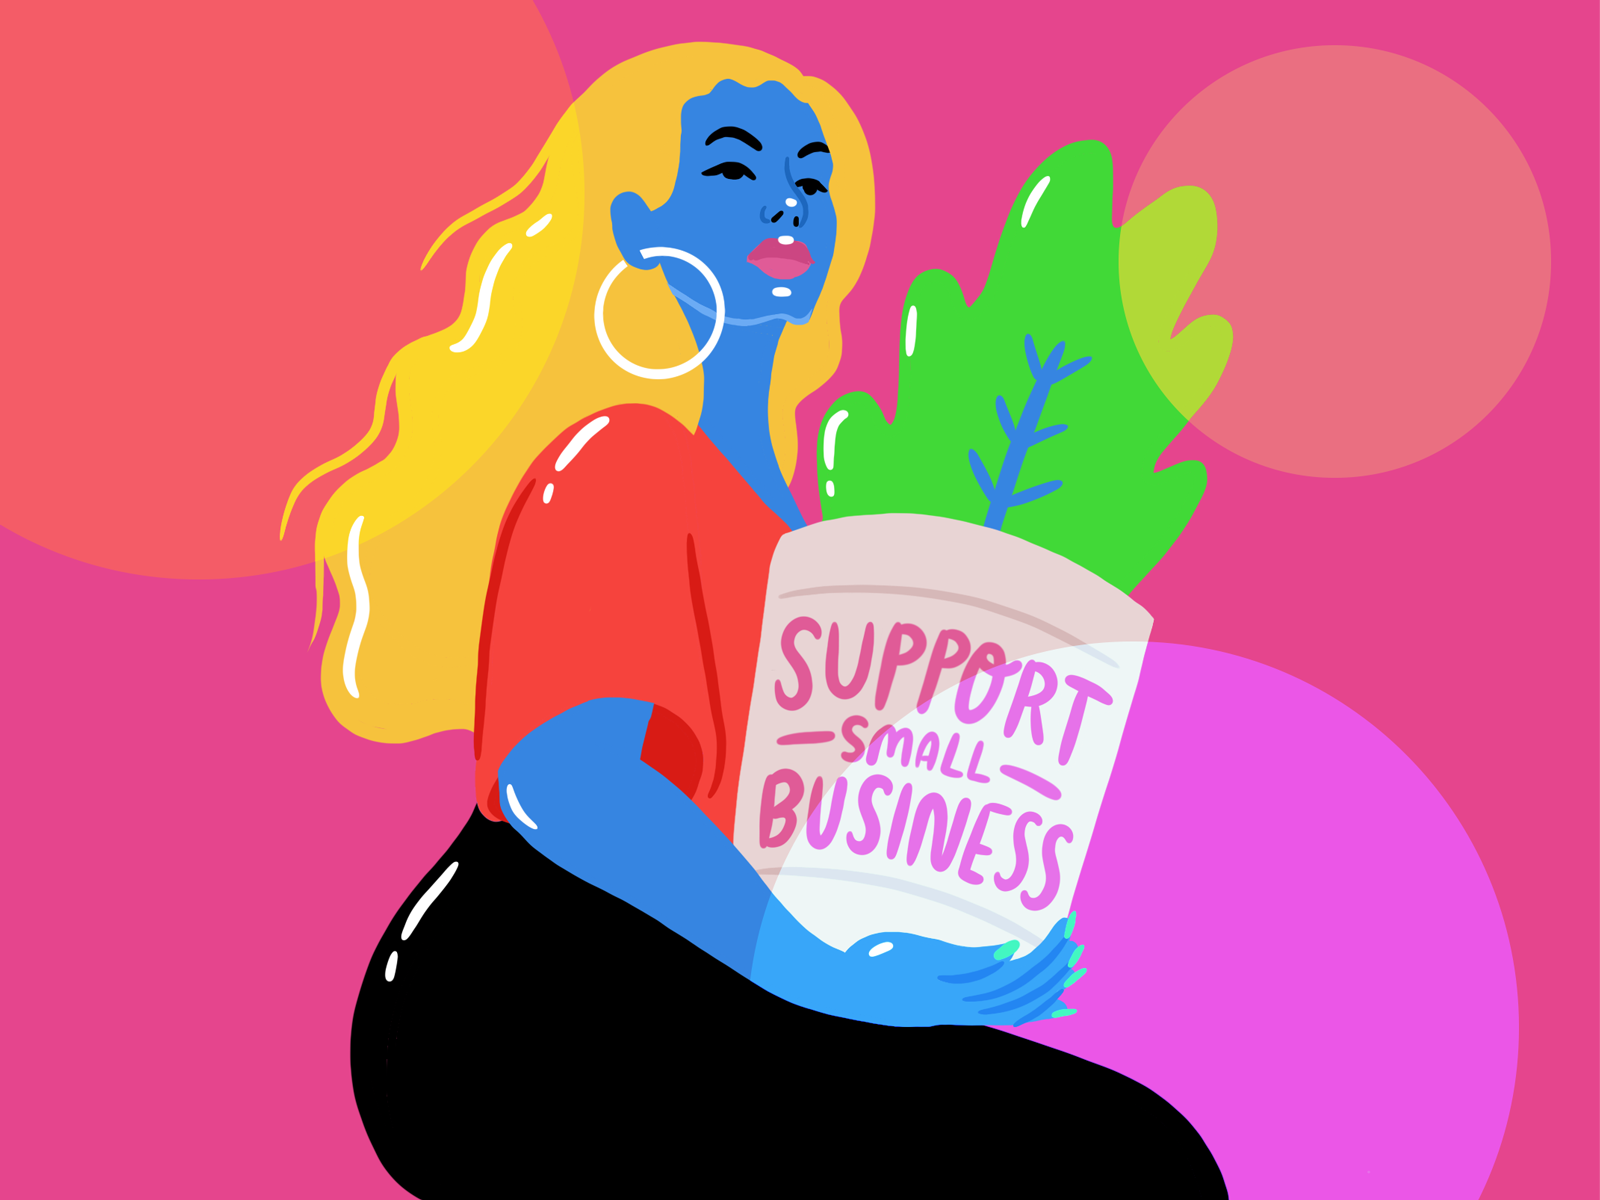 Support Small Business! by Lauren Jacobs on Dribbble